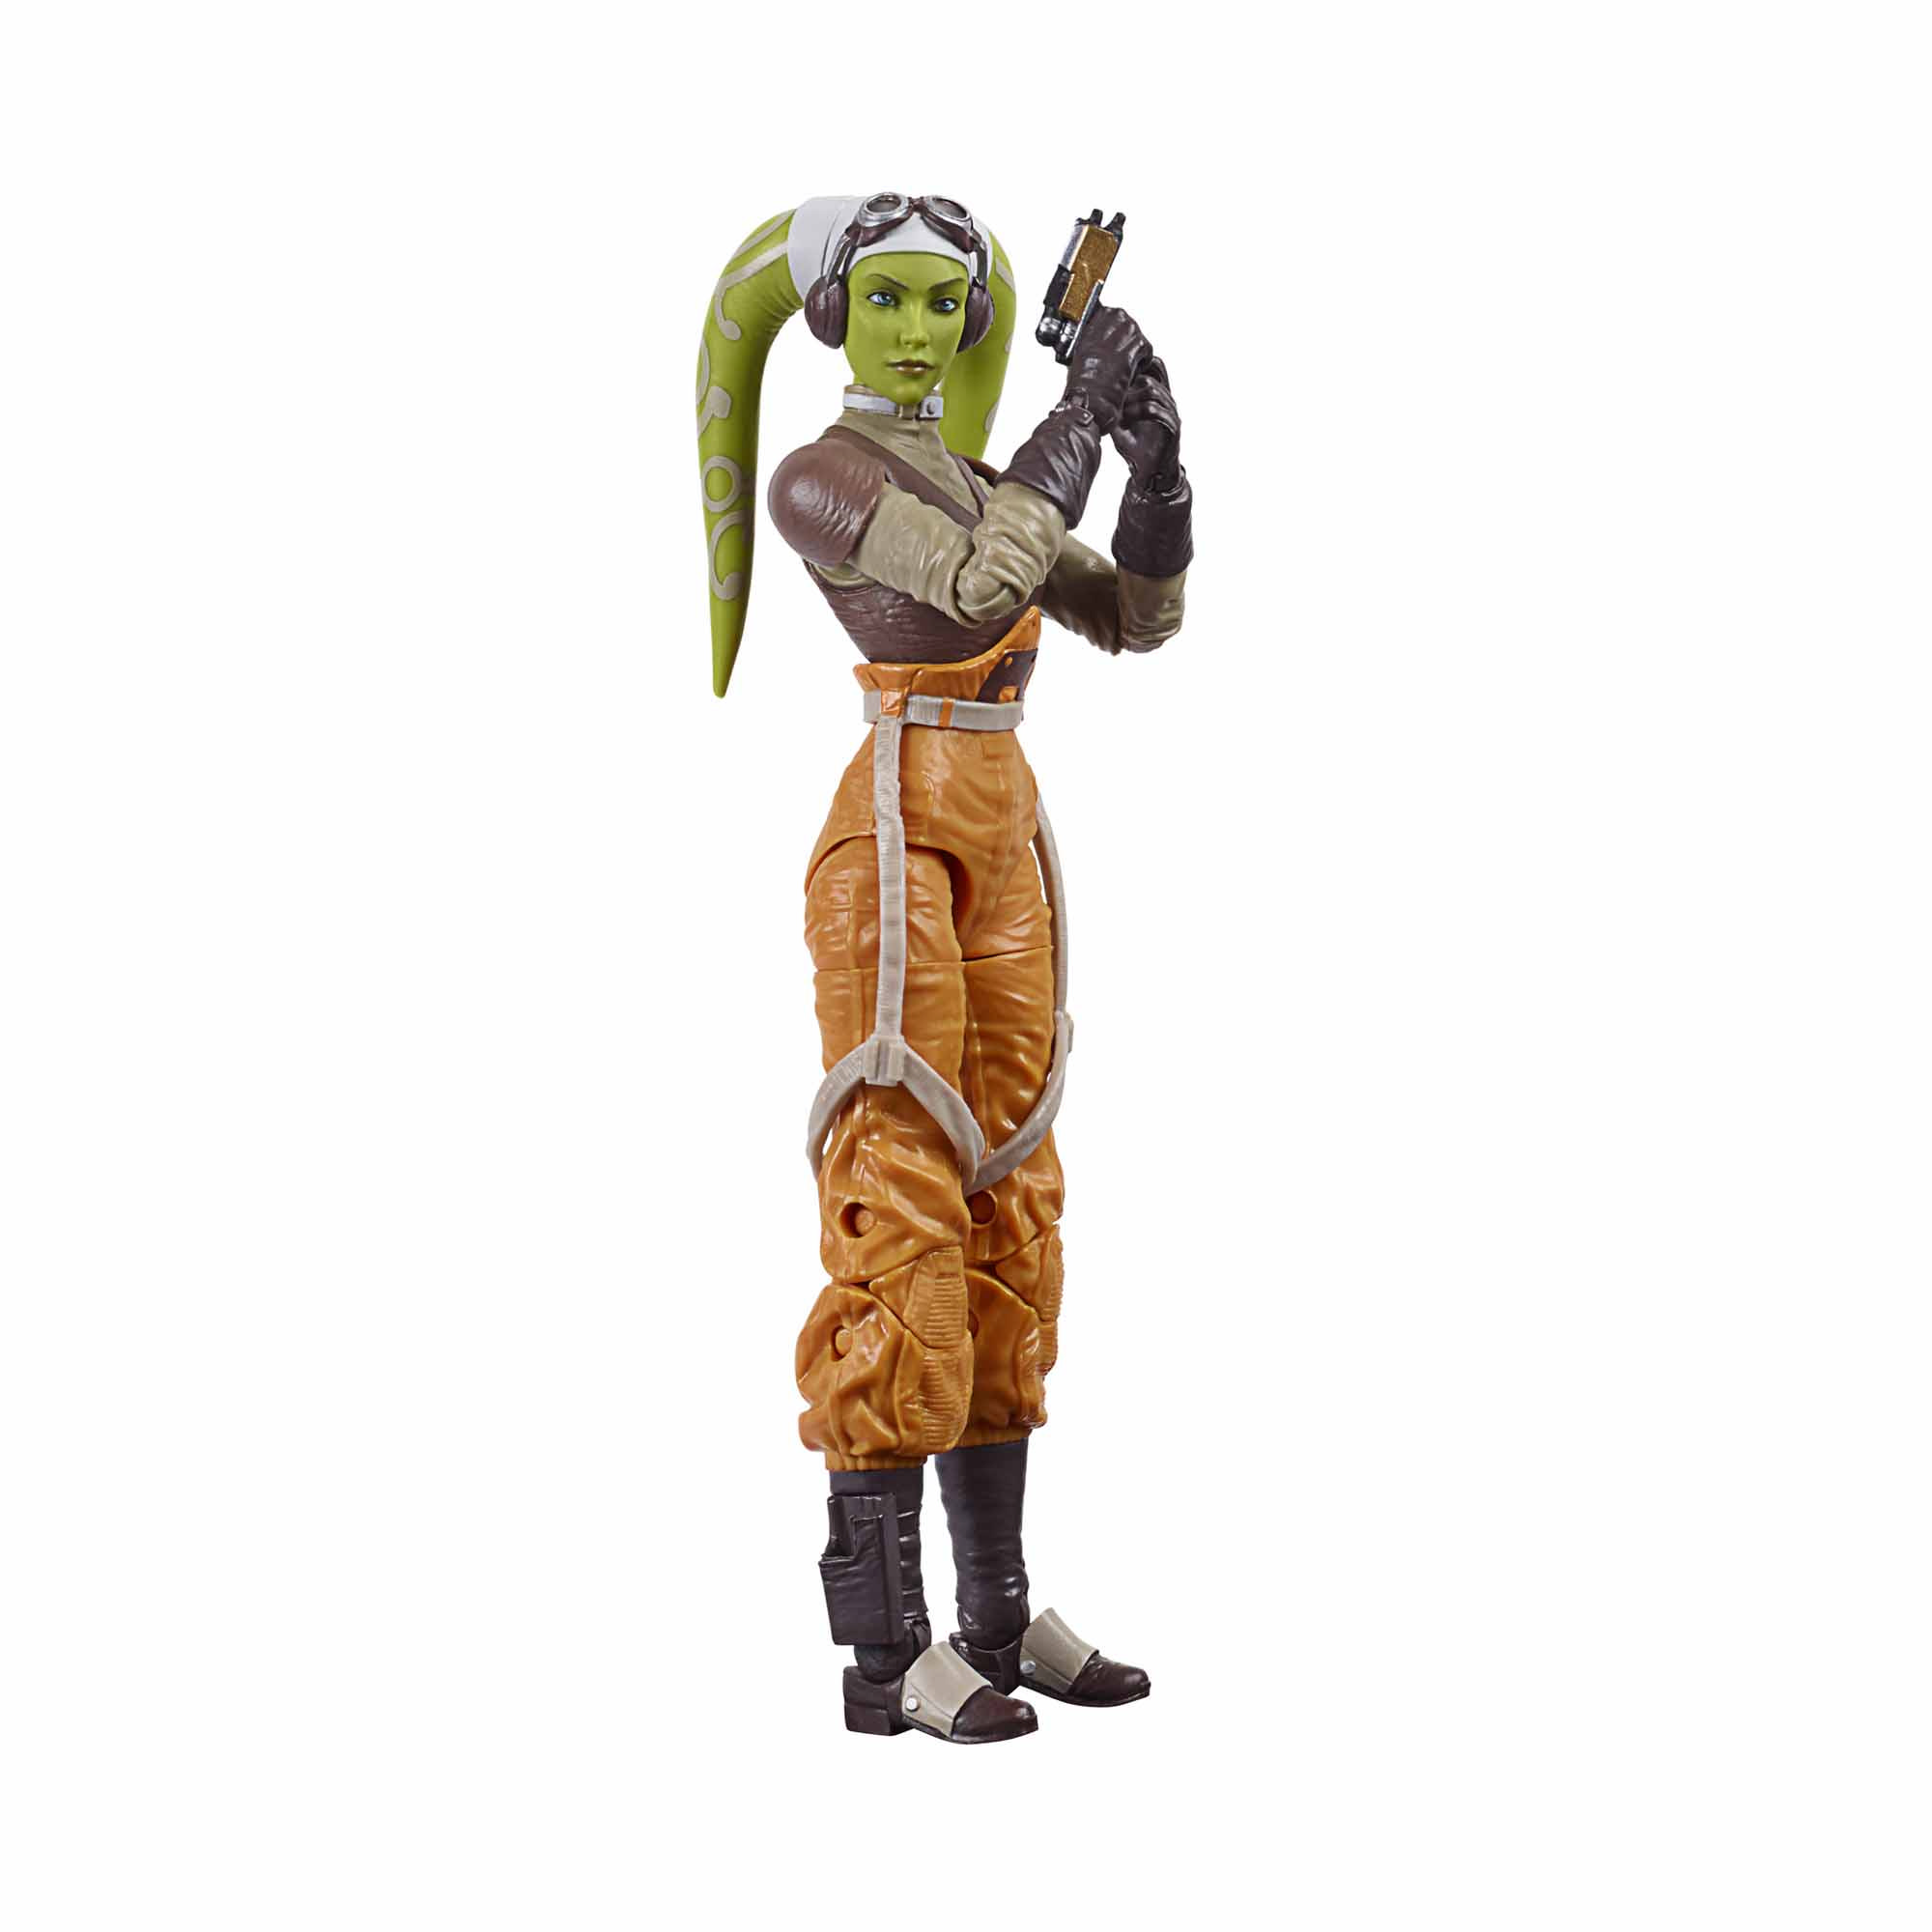 Star Wars The Black Series Hera Syndulla Toy 6-Inch-Scale Star Wars Rebels Collectible Action Figure, Kids Ages 4 and Up